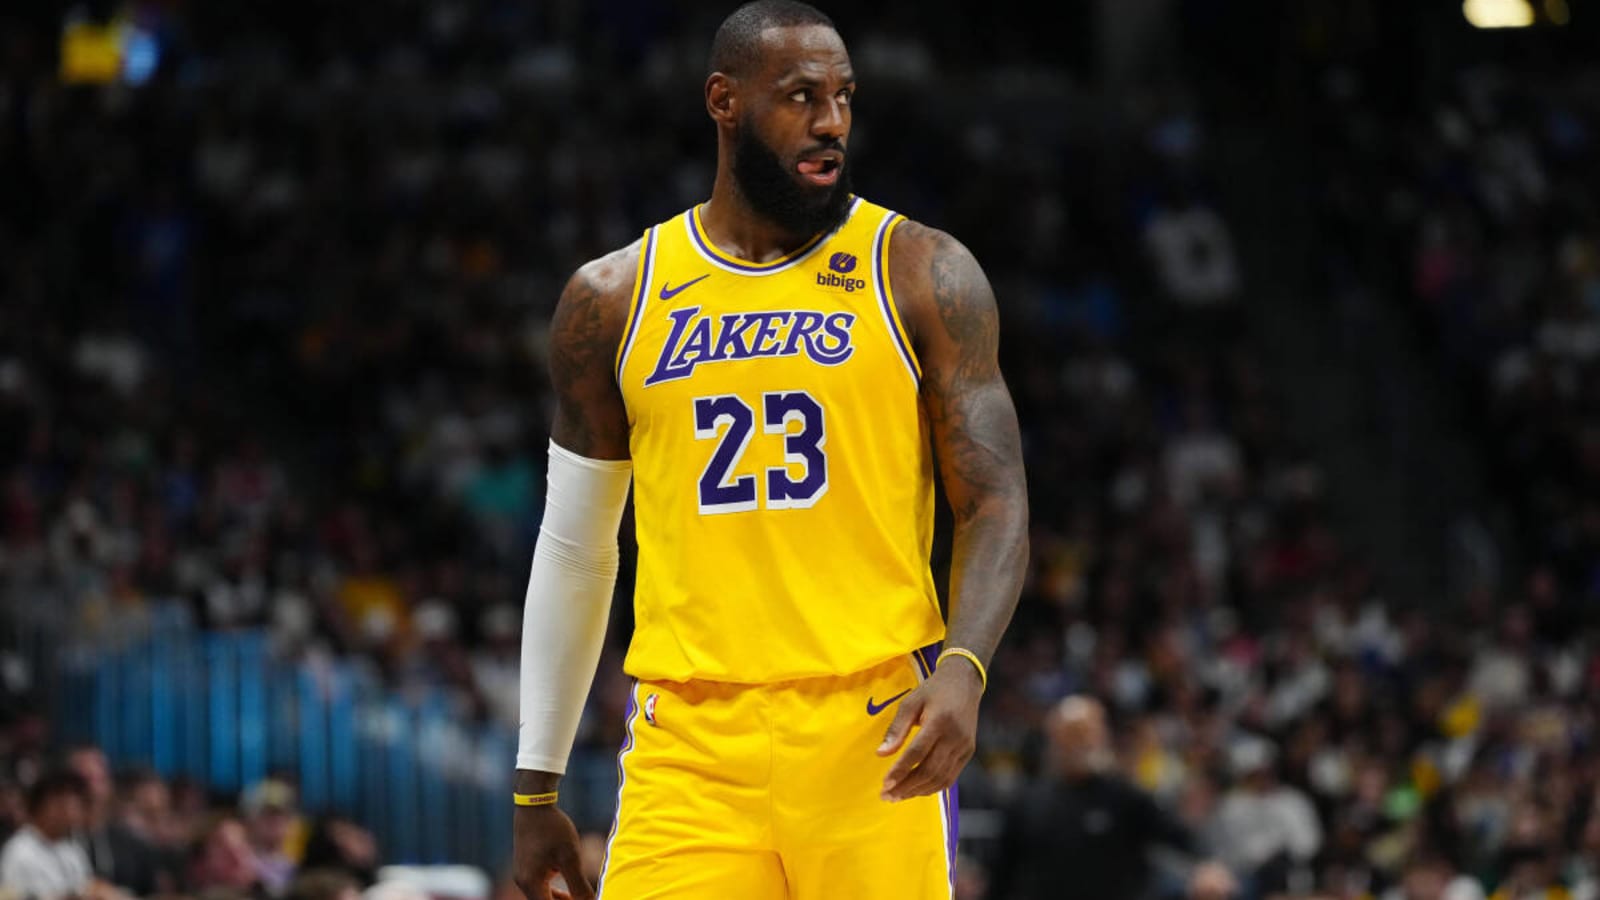 LeBron James Appears To Pop His Dislocated Finger Back Into Place During Nuggets Game